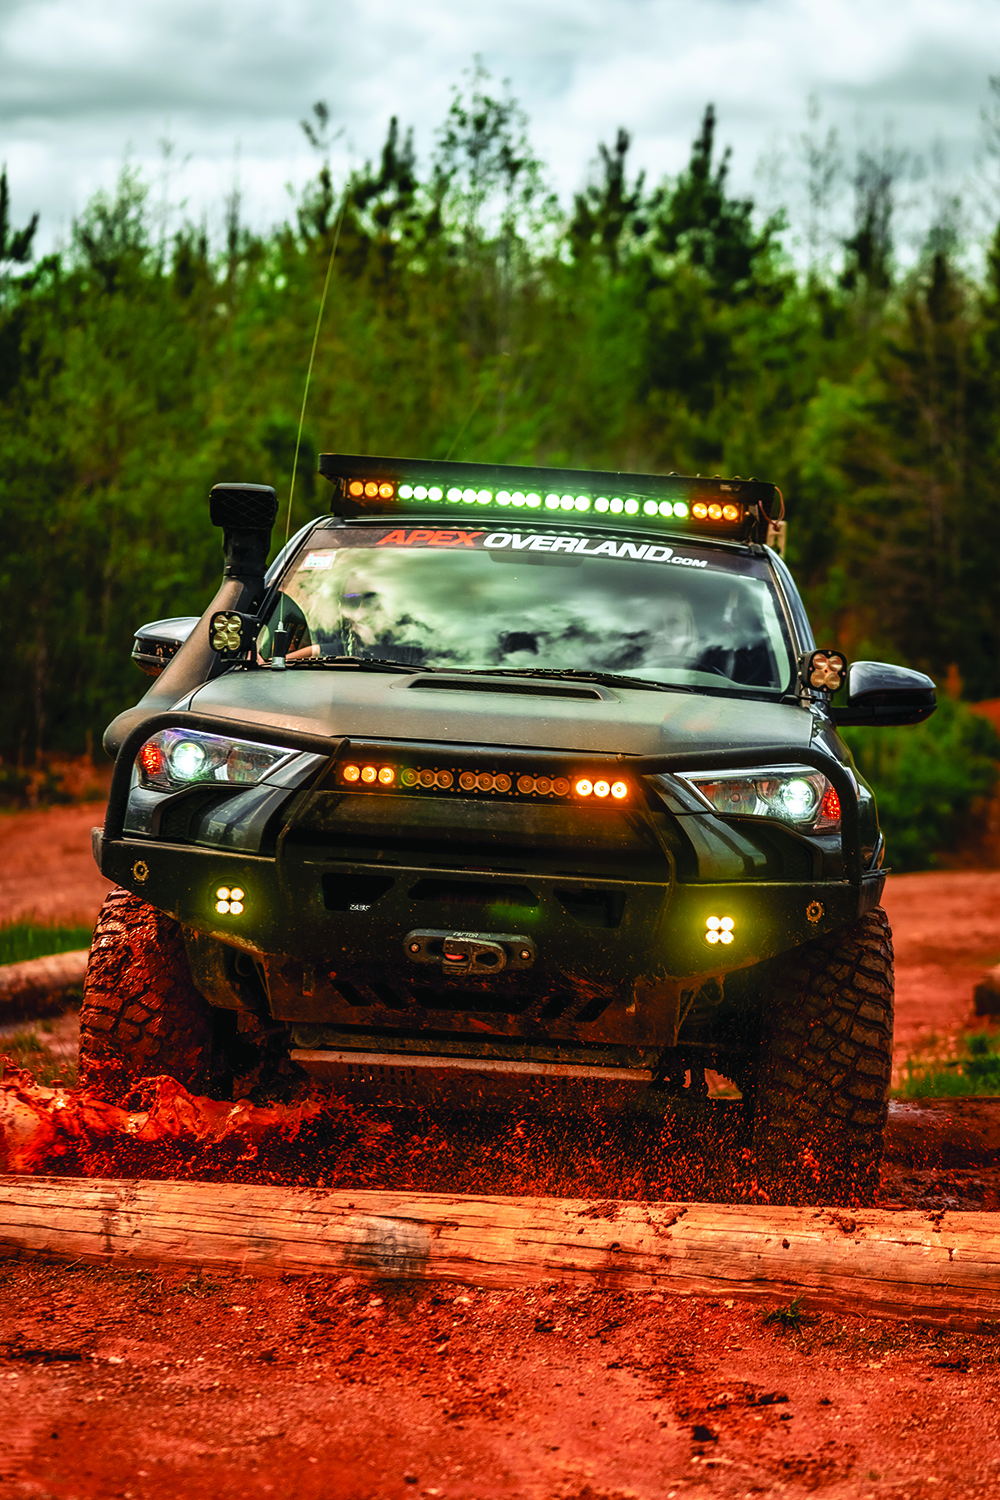 A front bumper shot of the Apex Overland 4Runner highlights its front LED light bar.